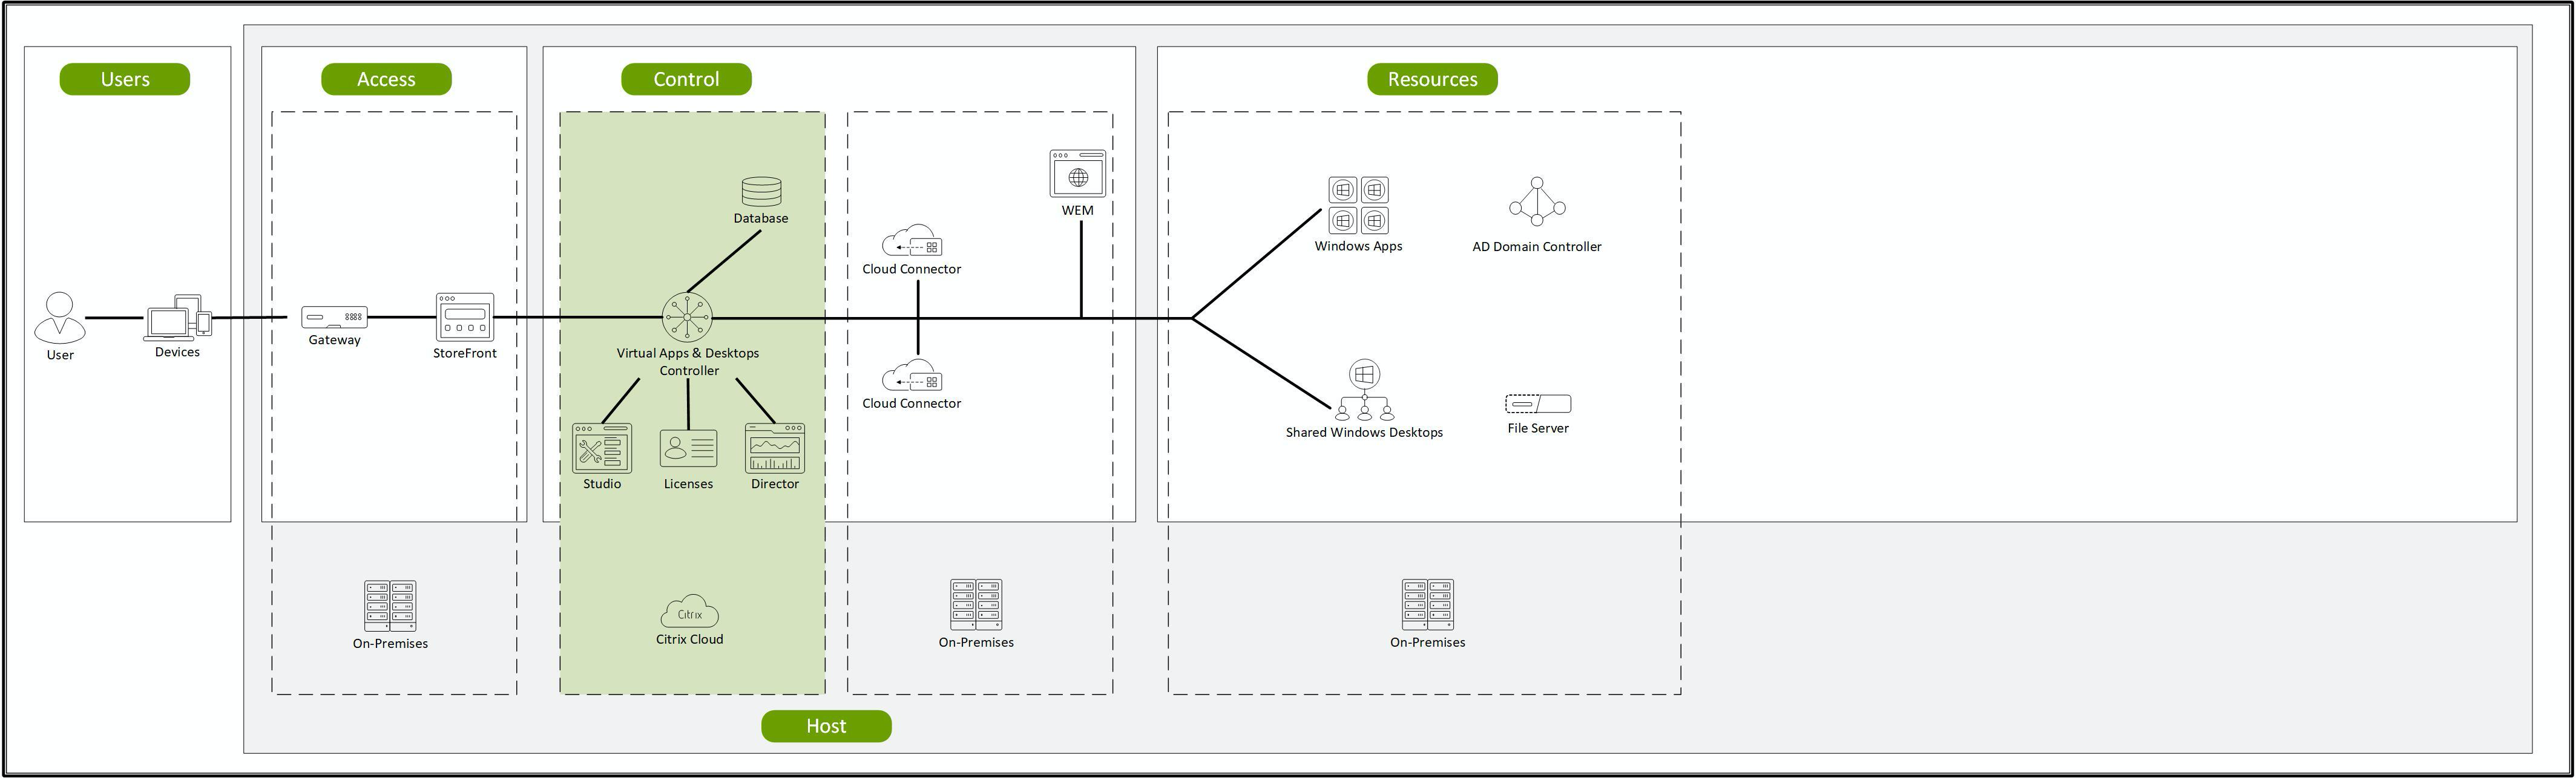 Environment with Citrix DaaS configured